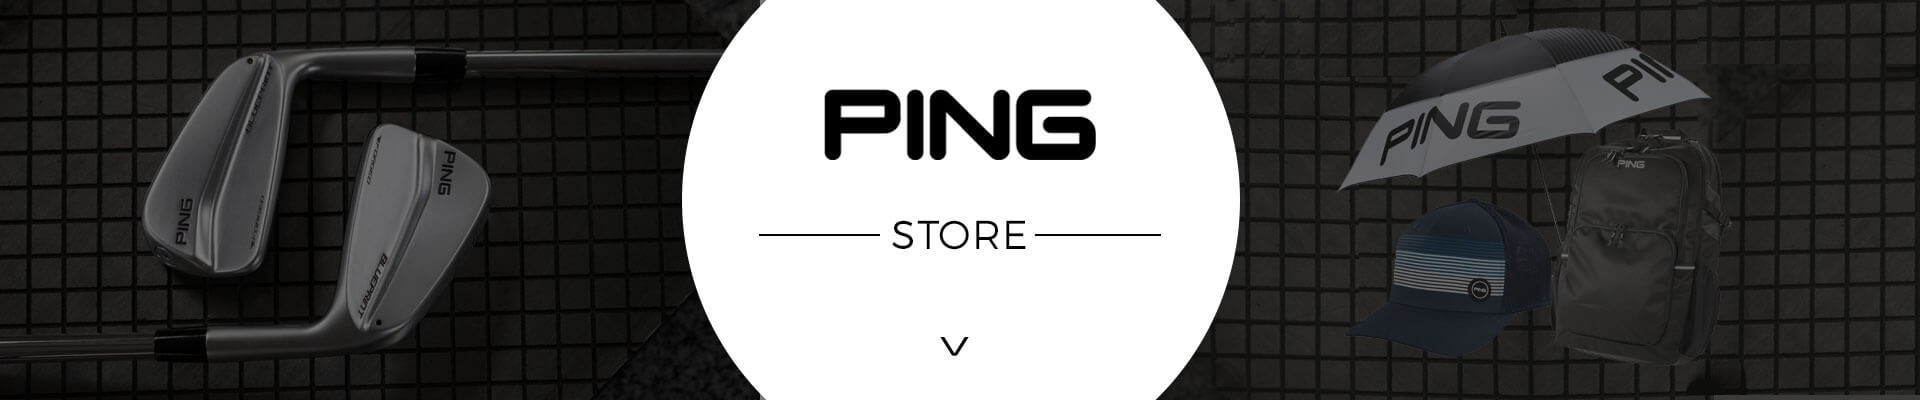 Ping Store